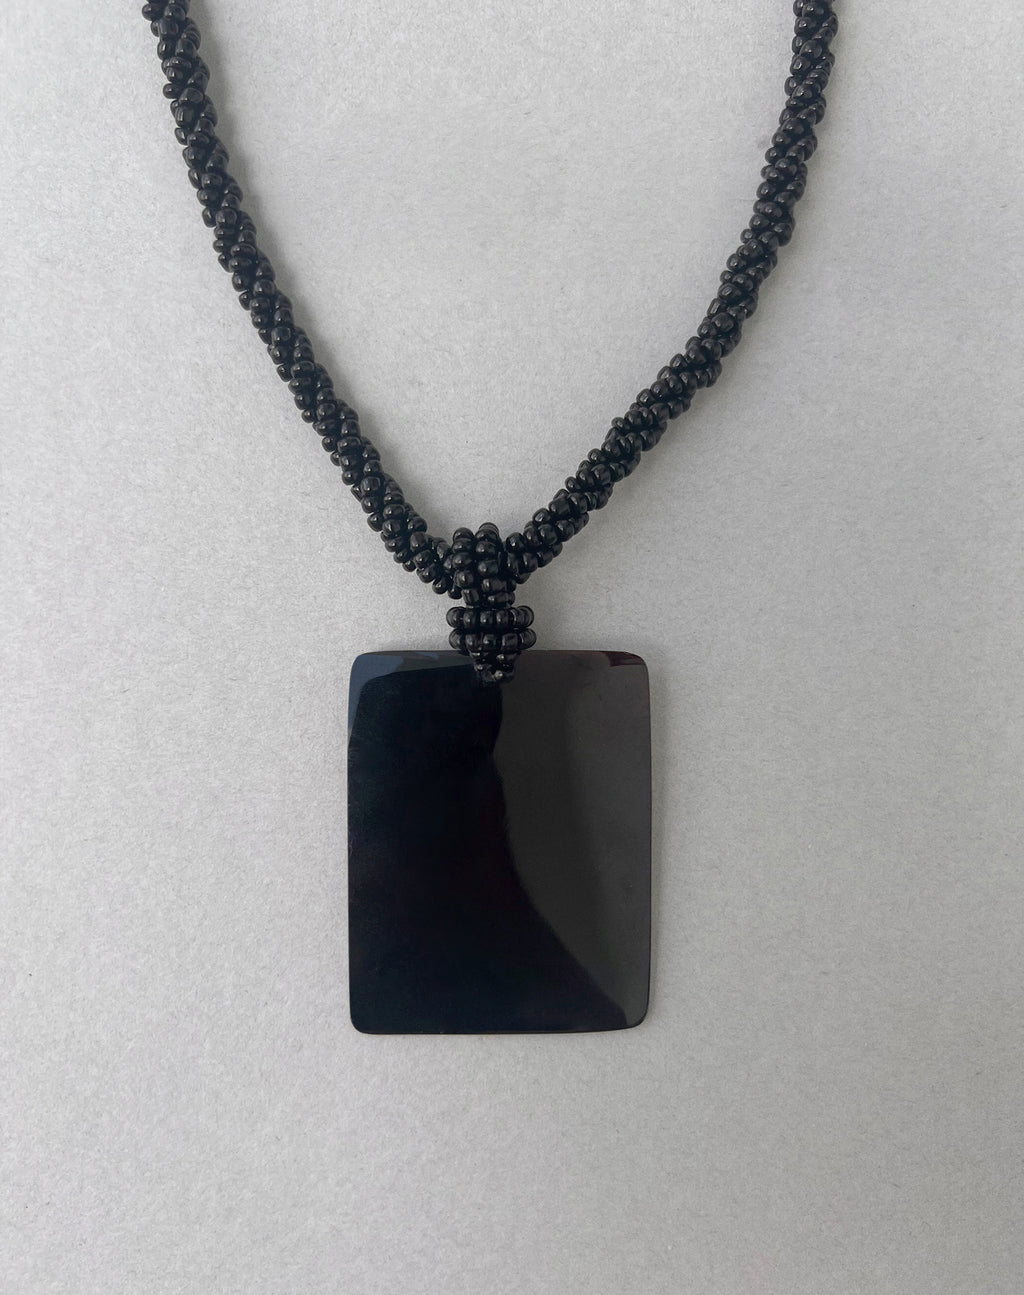 Bara Necklace with Black Rectangle Pendant